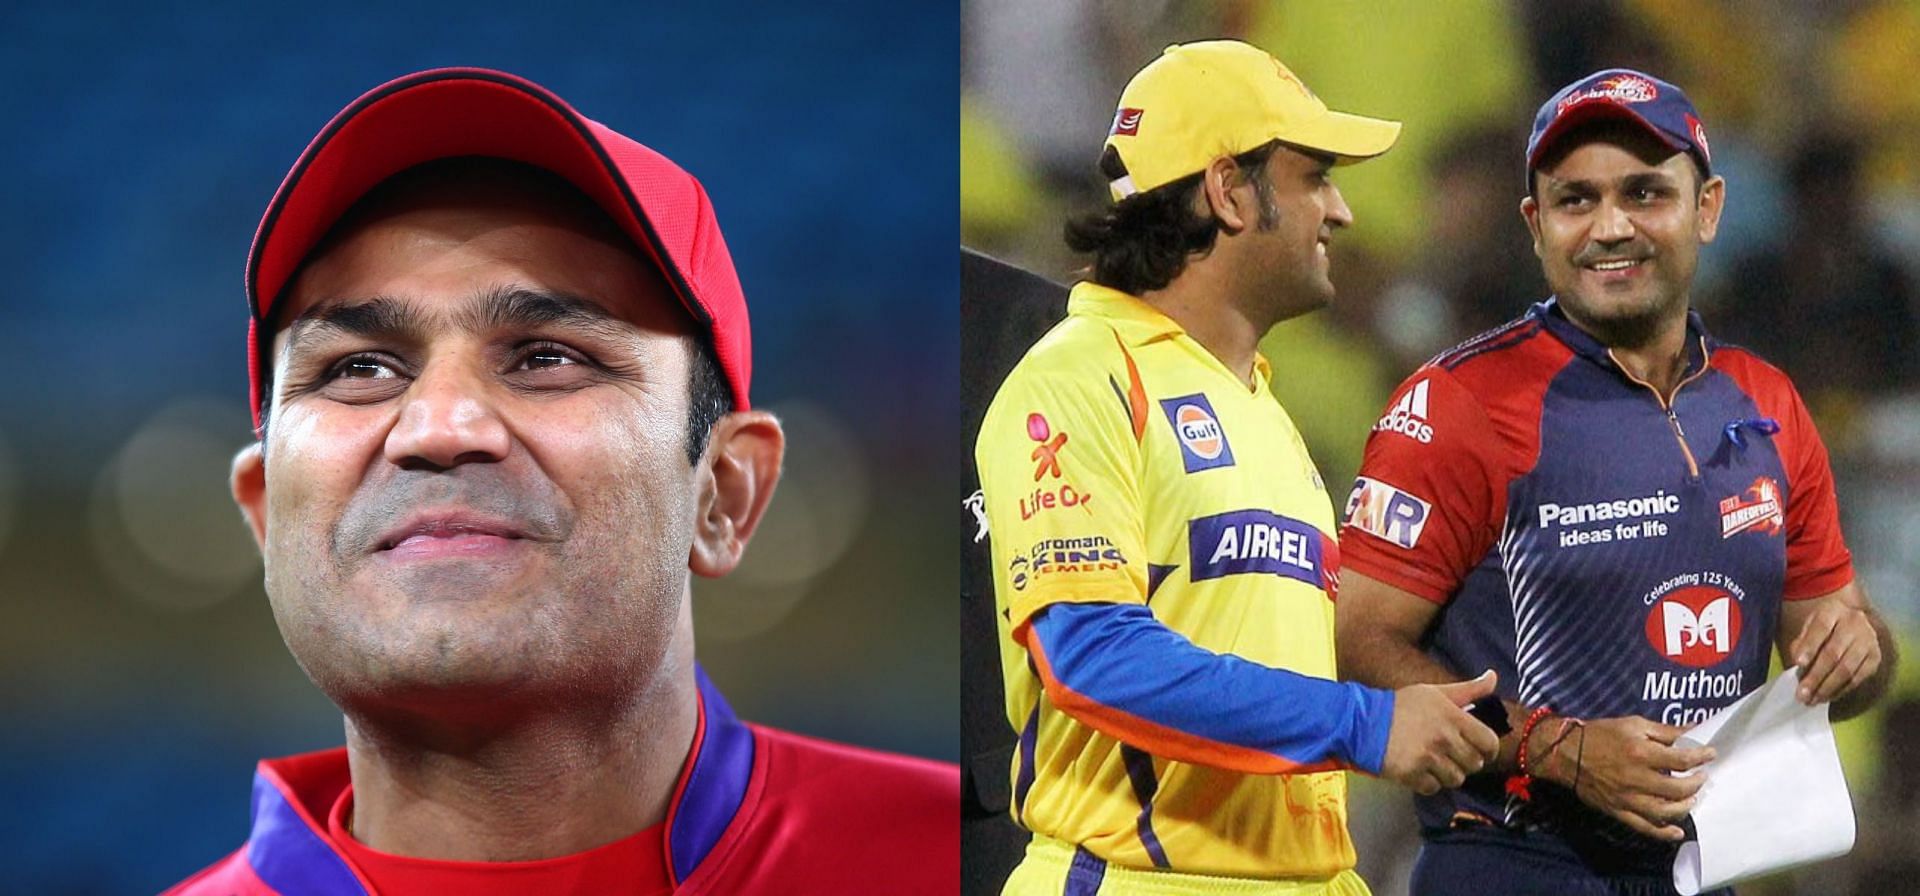 Former Delhi Daredevils (now Delhi Capitals) skipper Virender Sehwag revealed that the Chennai Super Kings (CSK) management was keen on appointing him as the captain of the franchise ahead of the inaugural edition of the IPL back in 2008.